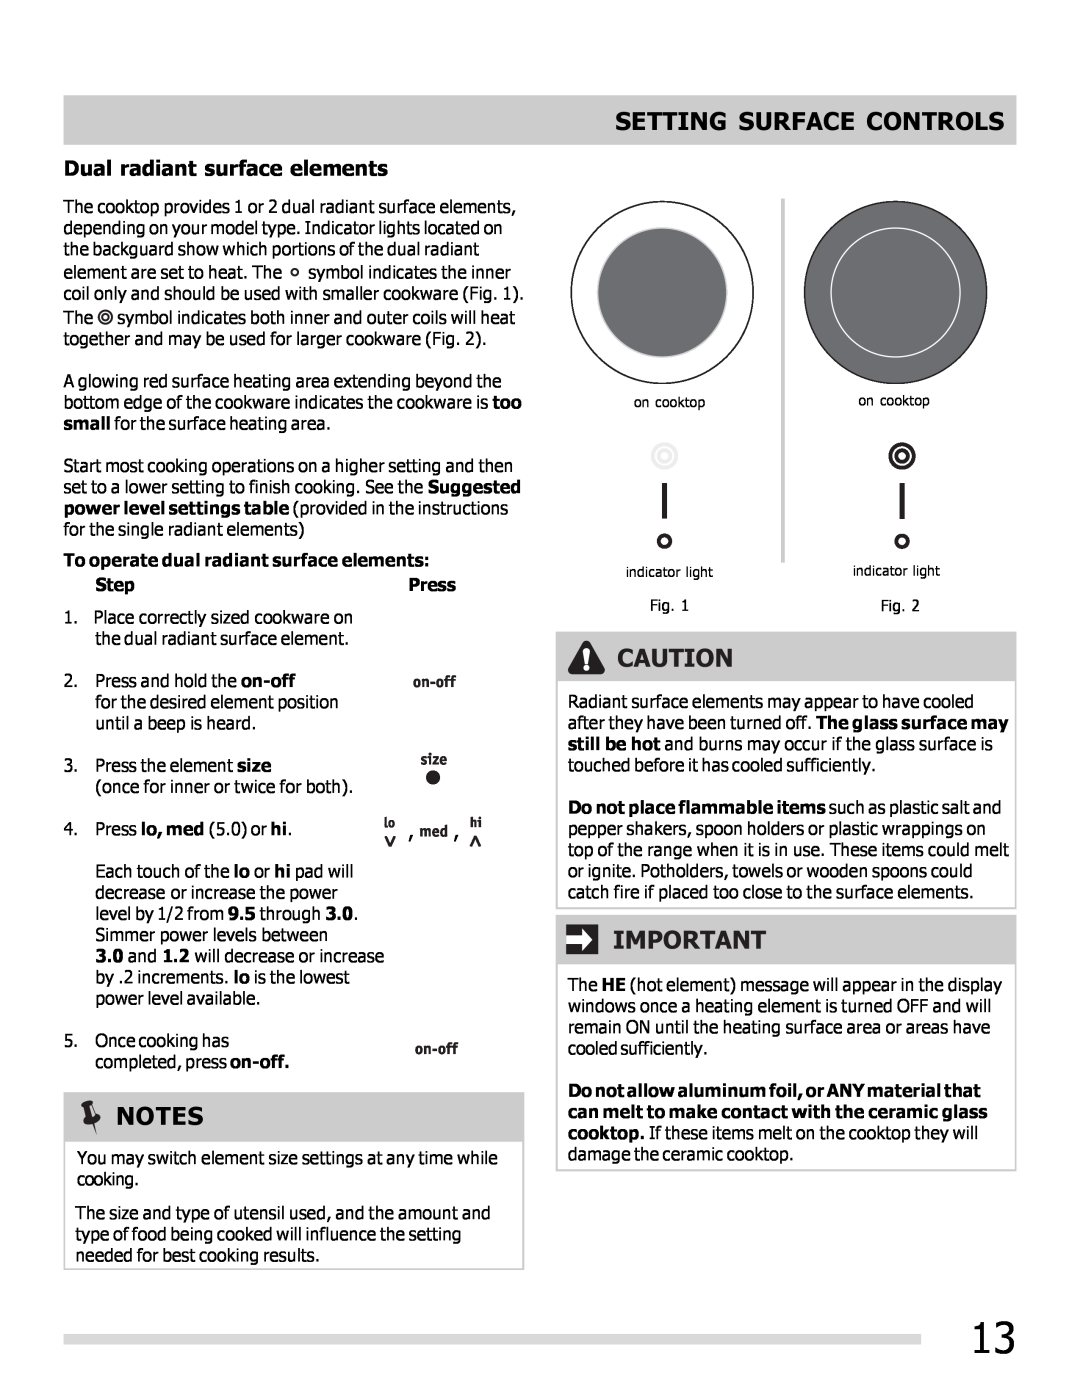 Frigidaire 316902202 important safety instructions Dual radiant surface elements, Setting Surface Controls 